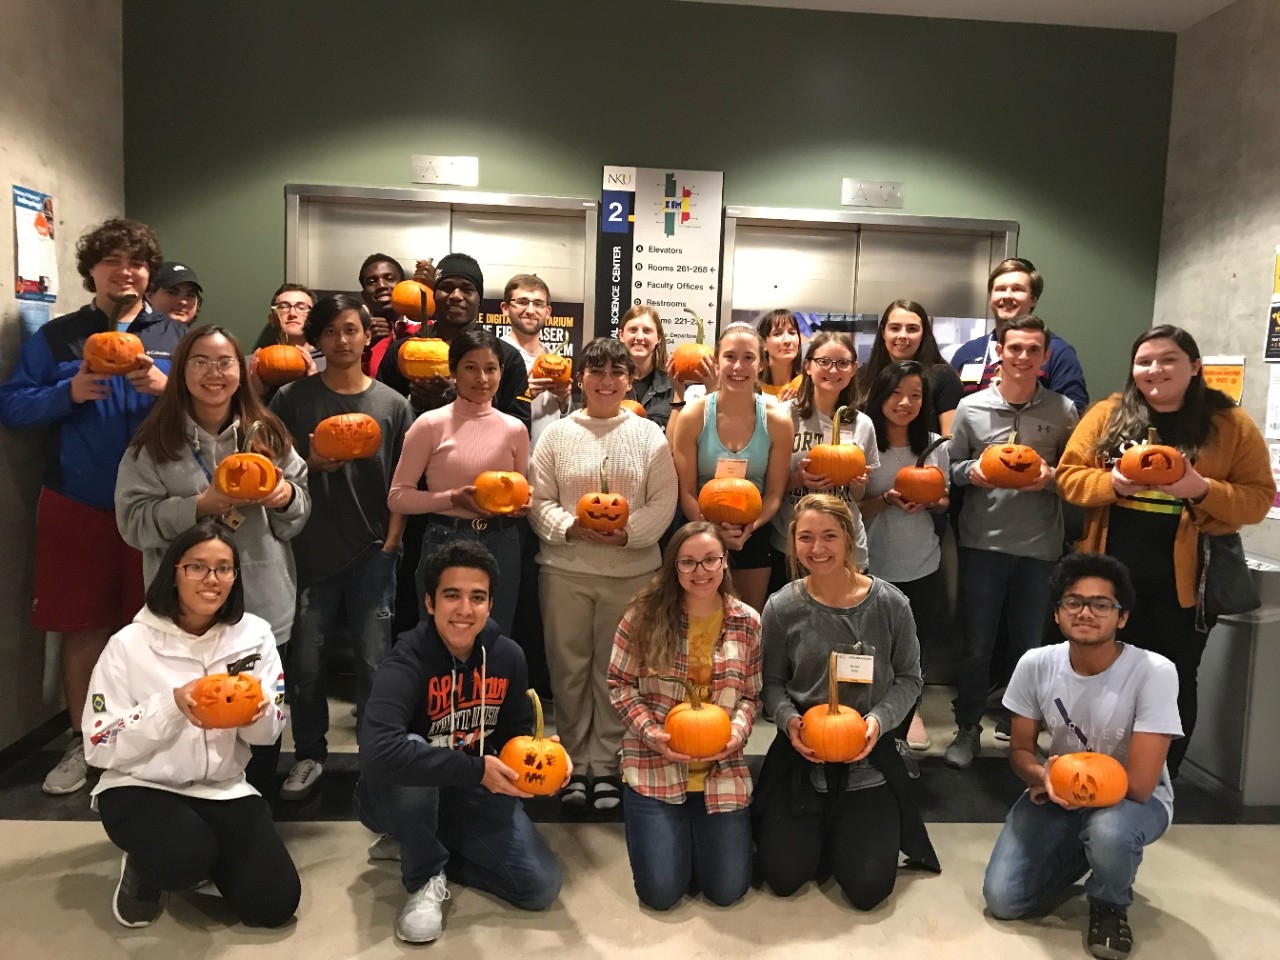 STEM students posing with their carved pumpkins at a pumpkin carving event